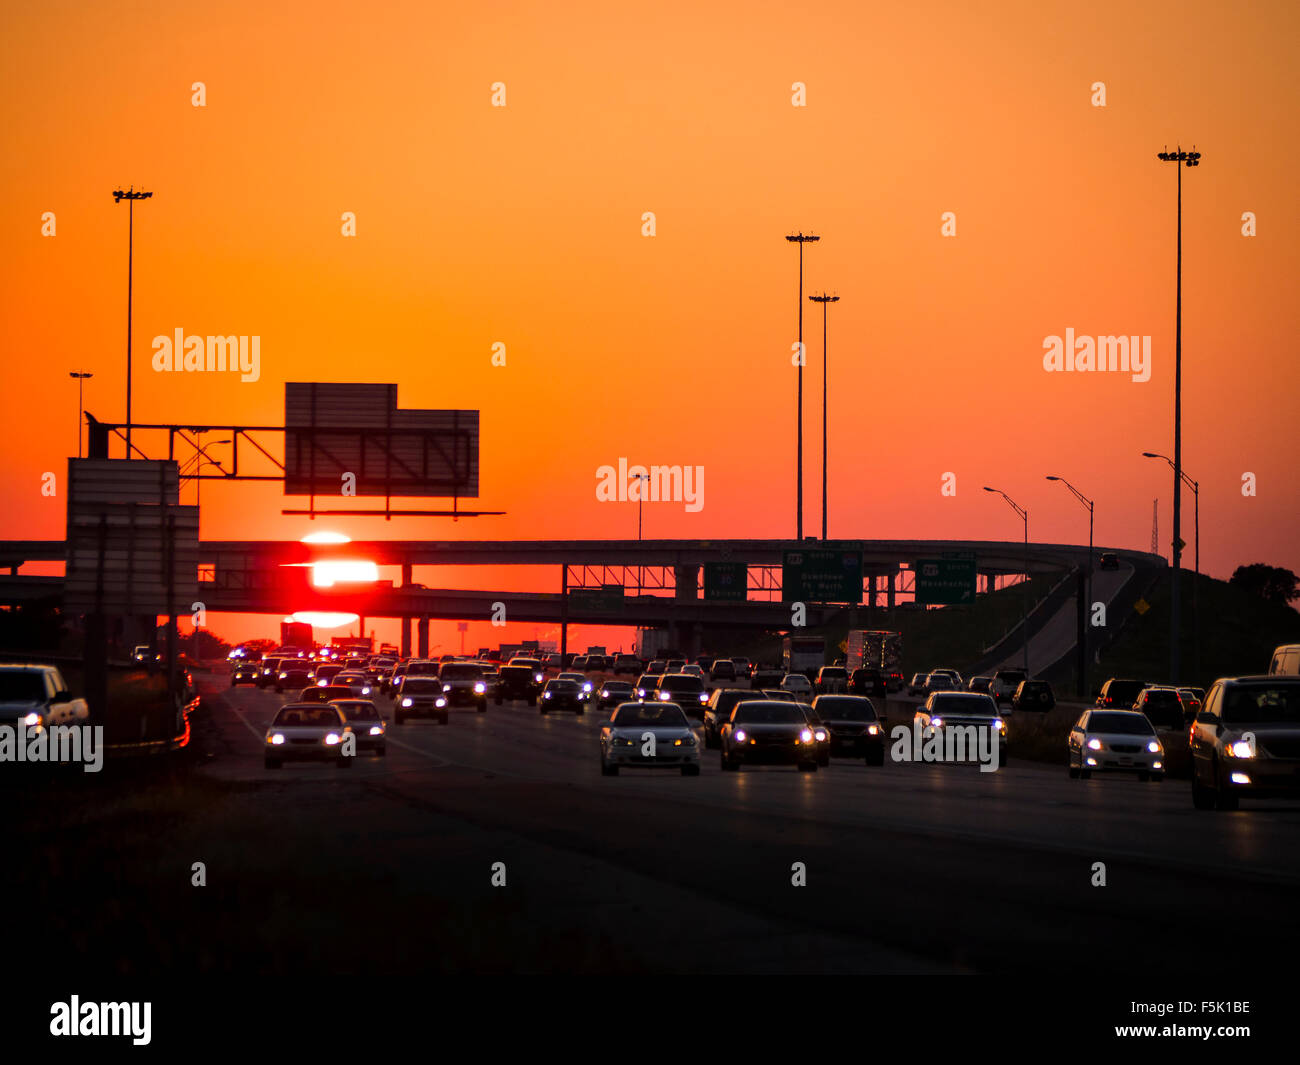 It's a long day fighting traffic to  get home after work. Bumper to bumper traffic on a major freeway as the sun sets in the West. Stock Photo